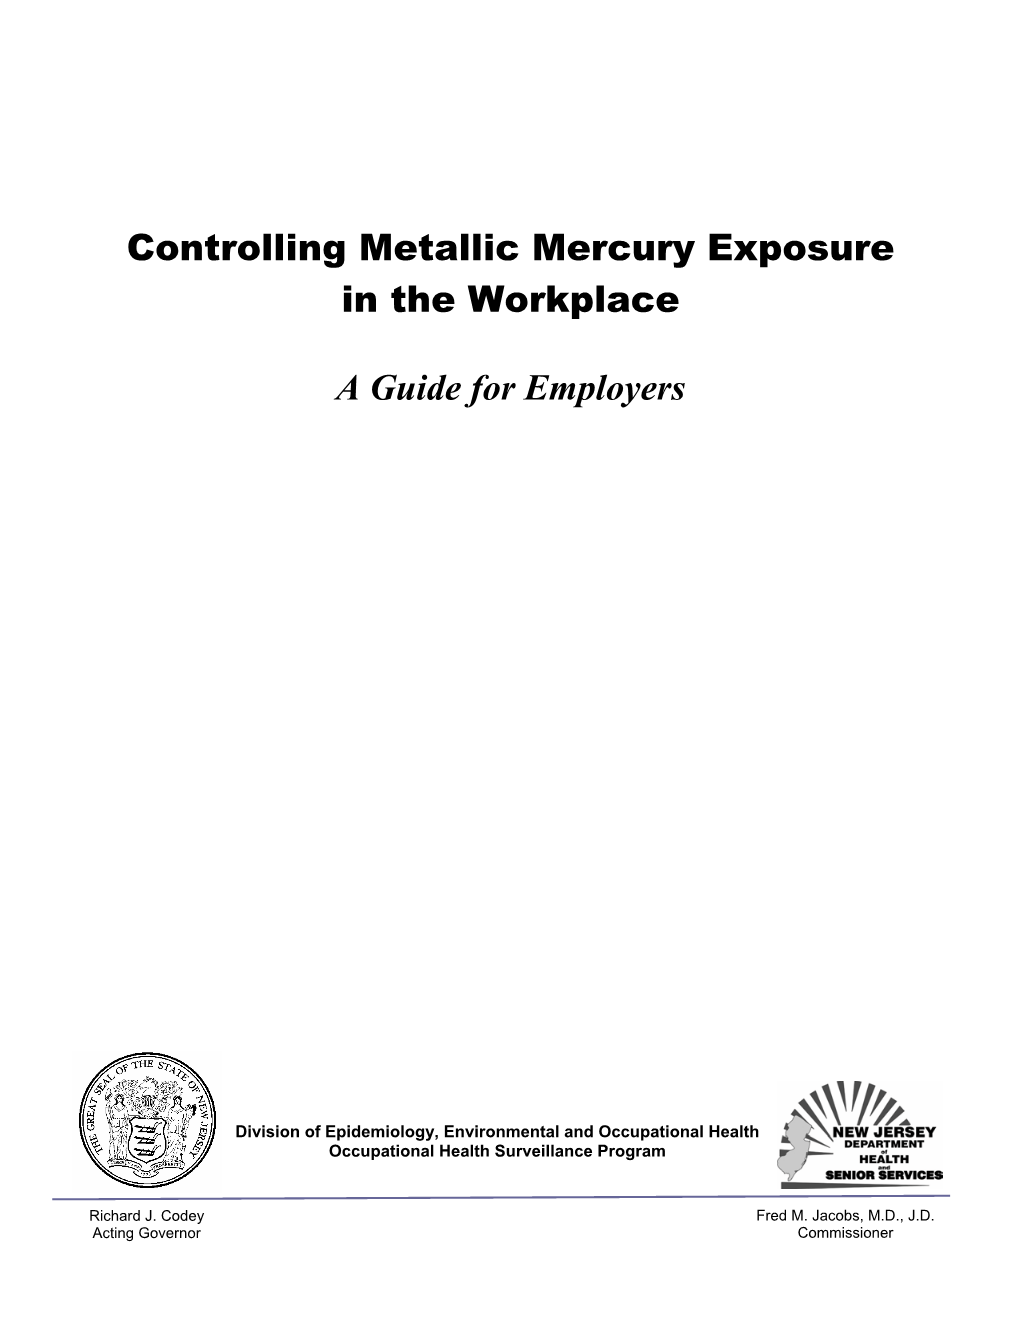 Controlling Metallic Mercury Exposure in the Workplace- a Guide for Employers